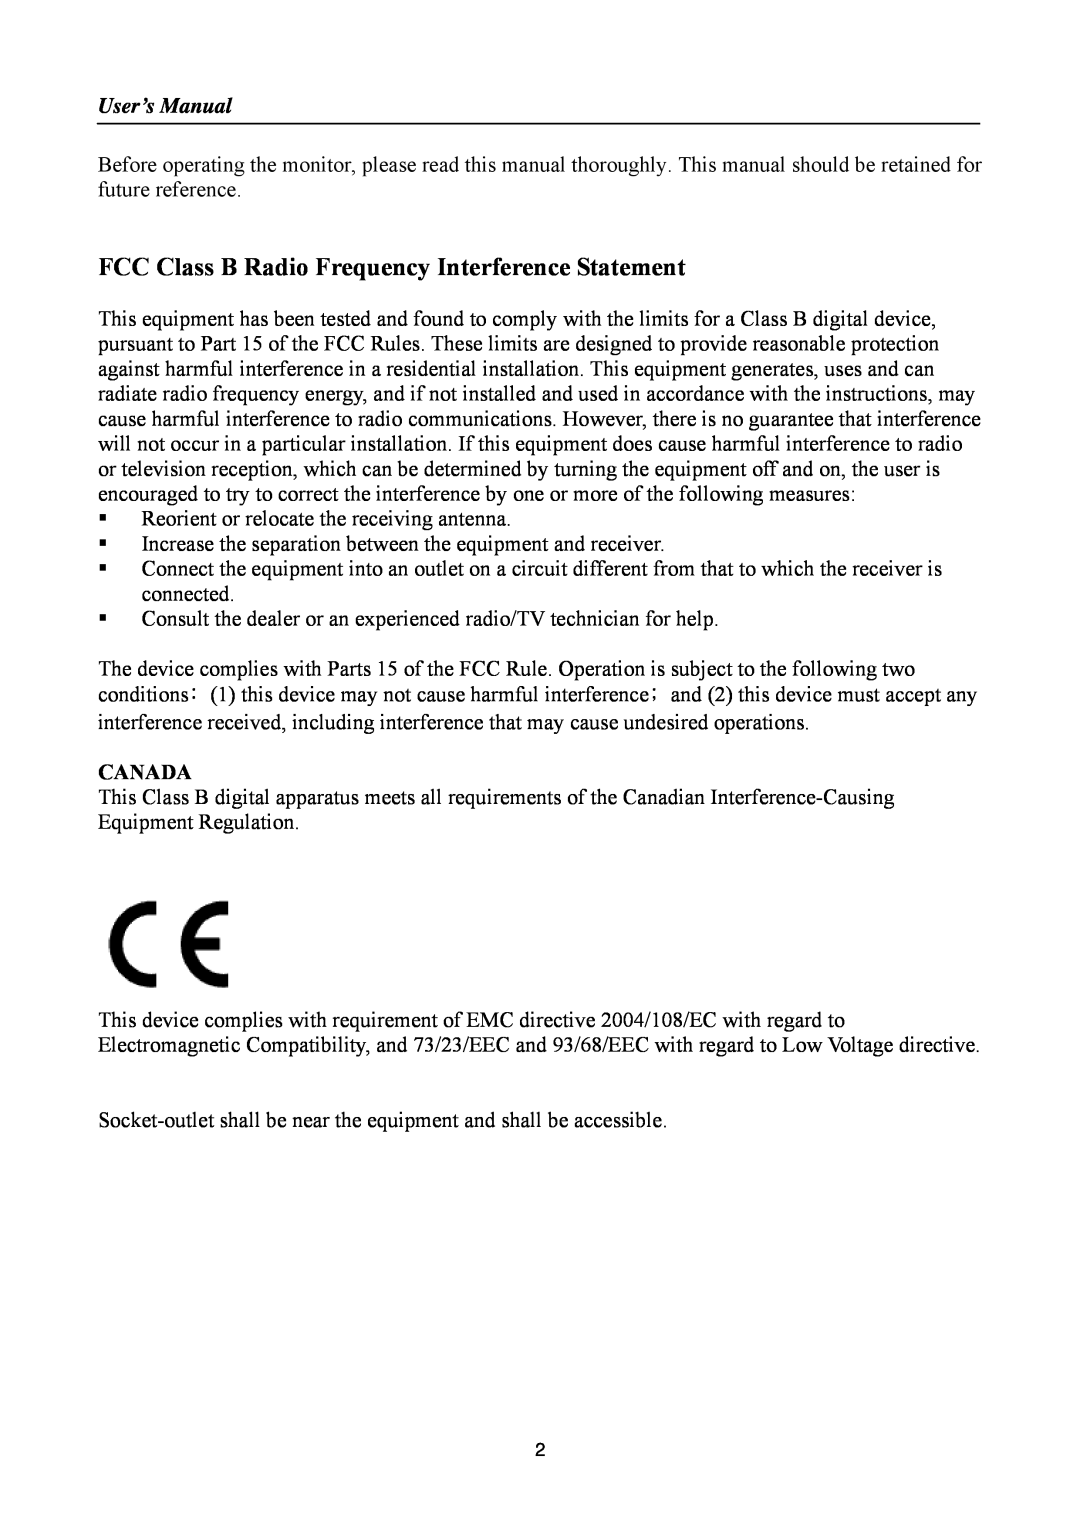 Hanns.G HA191 manual FCC Class B Radio Frequency Interference Statement, User’s Manual, Canada 